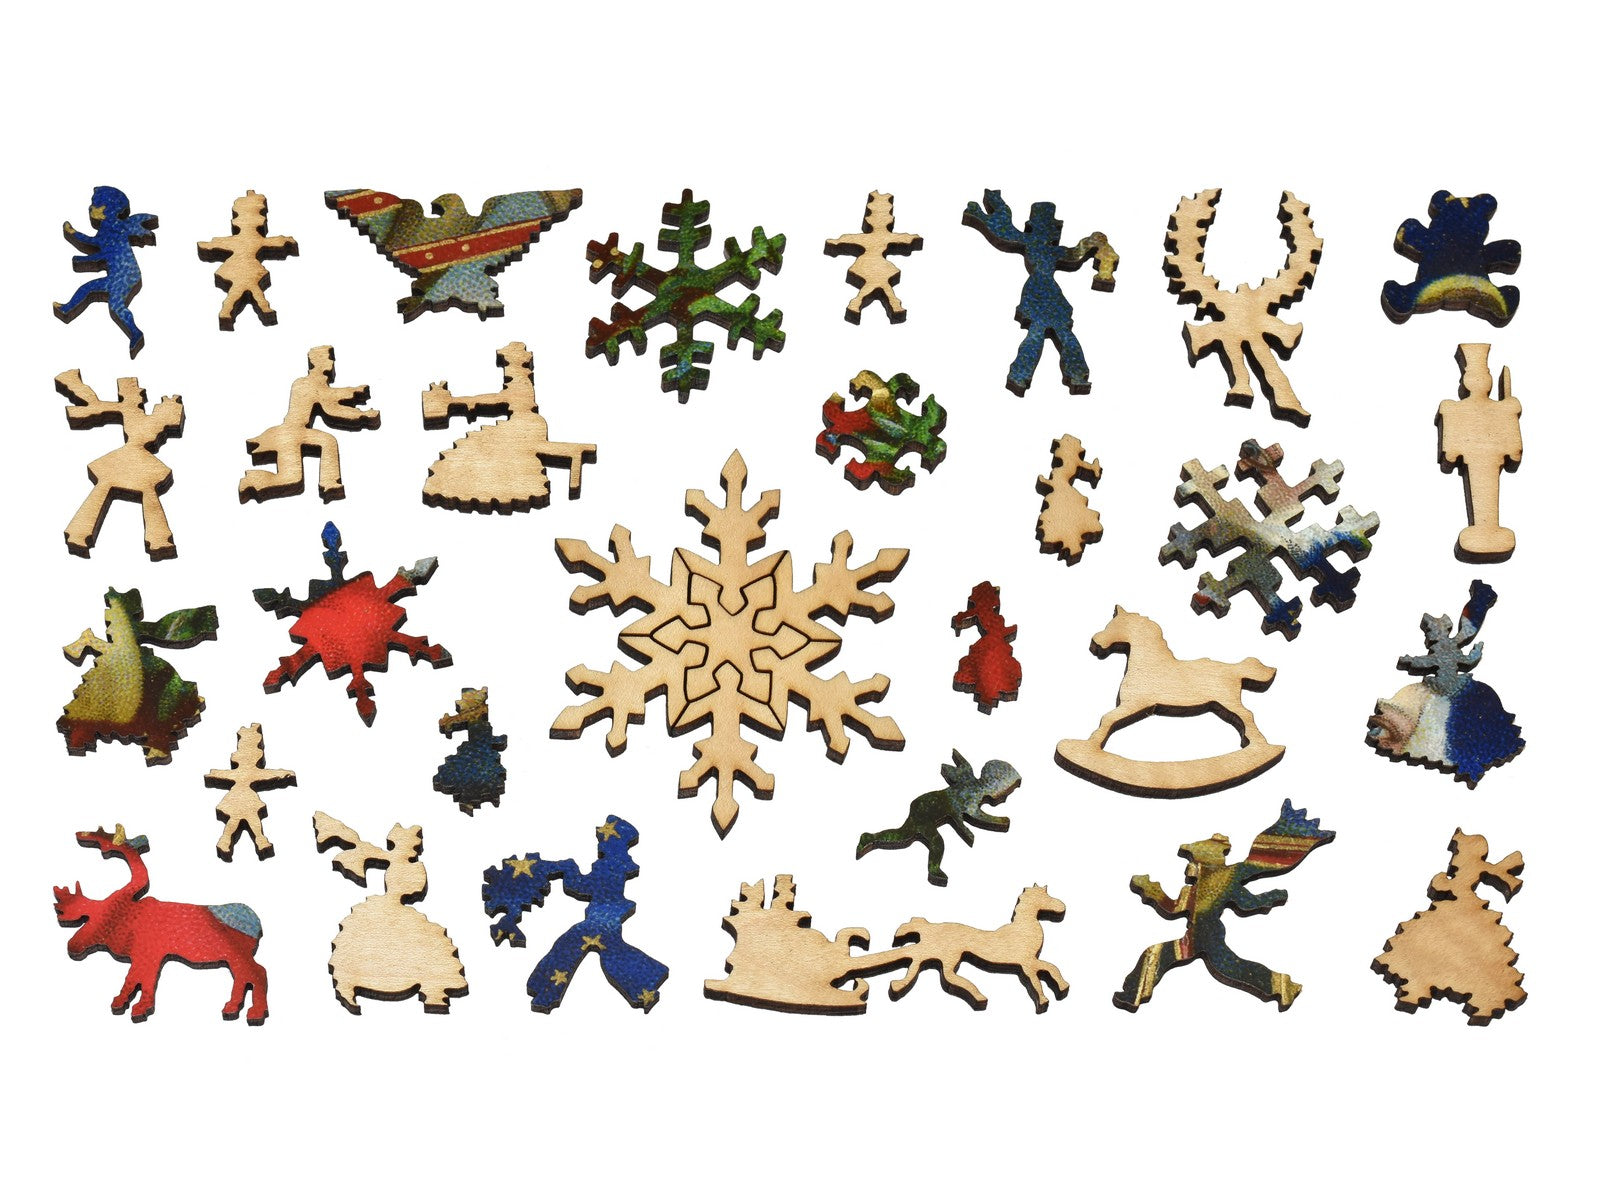 The whimsy pieces that can be found in the puzzle, Christmas Greetings.